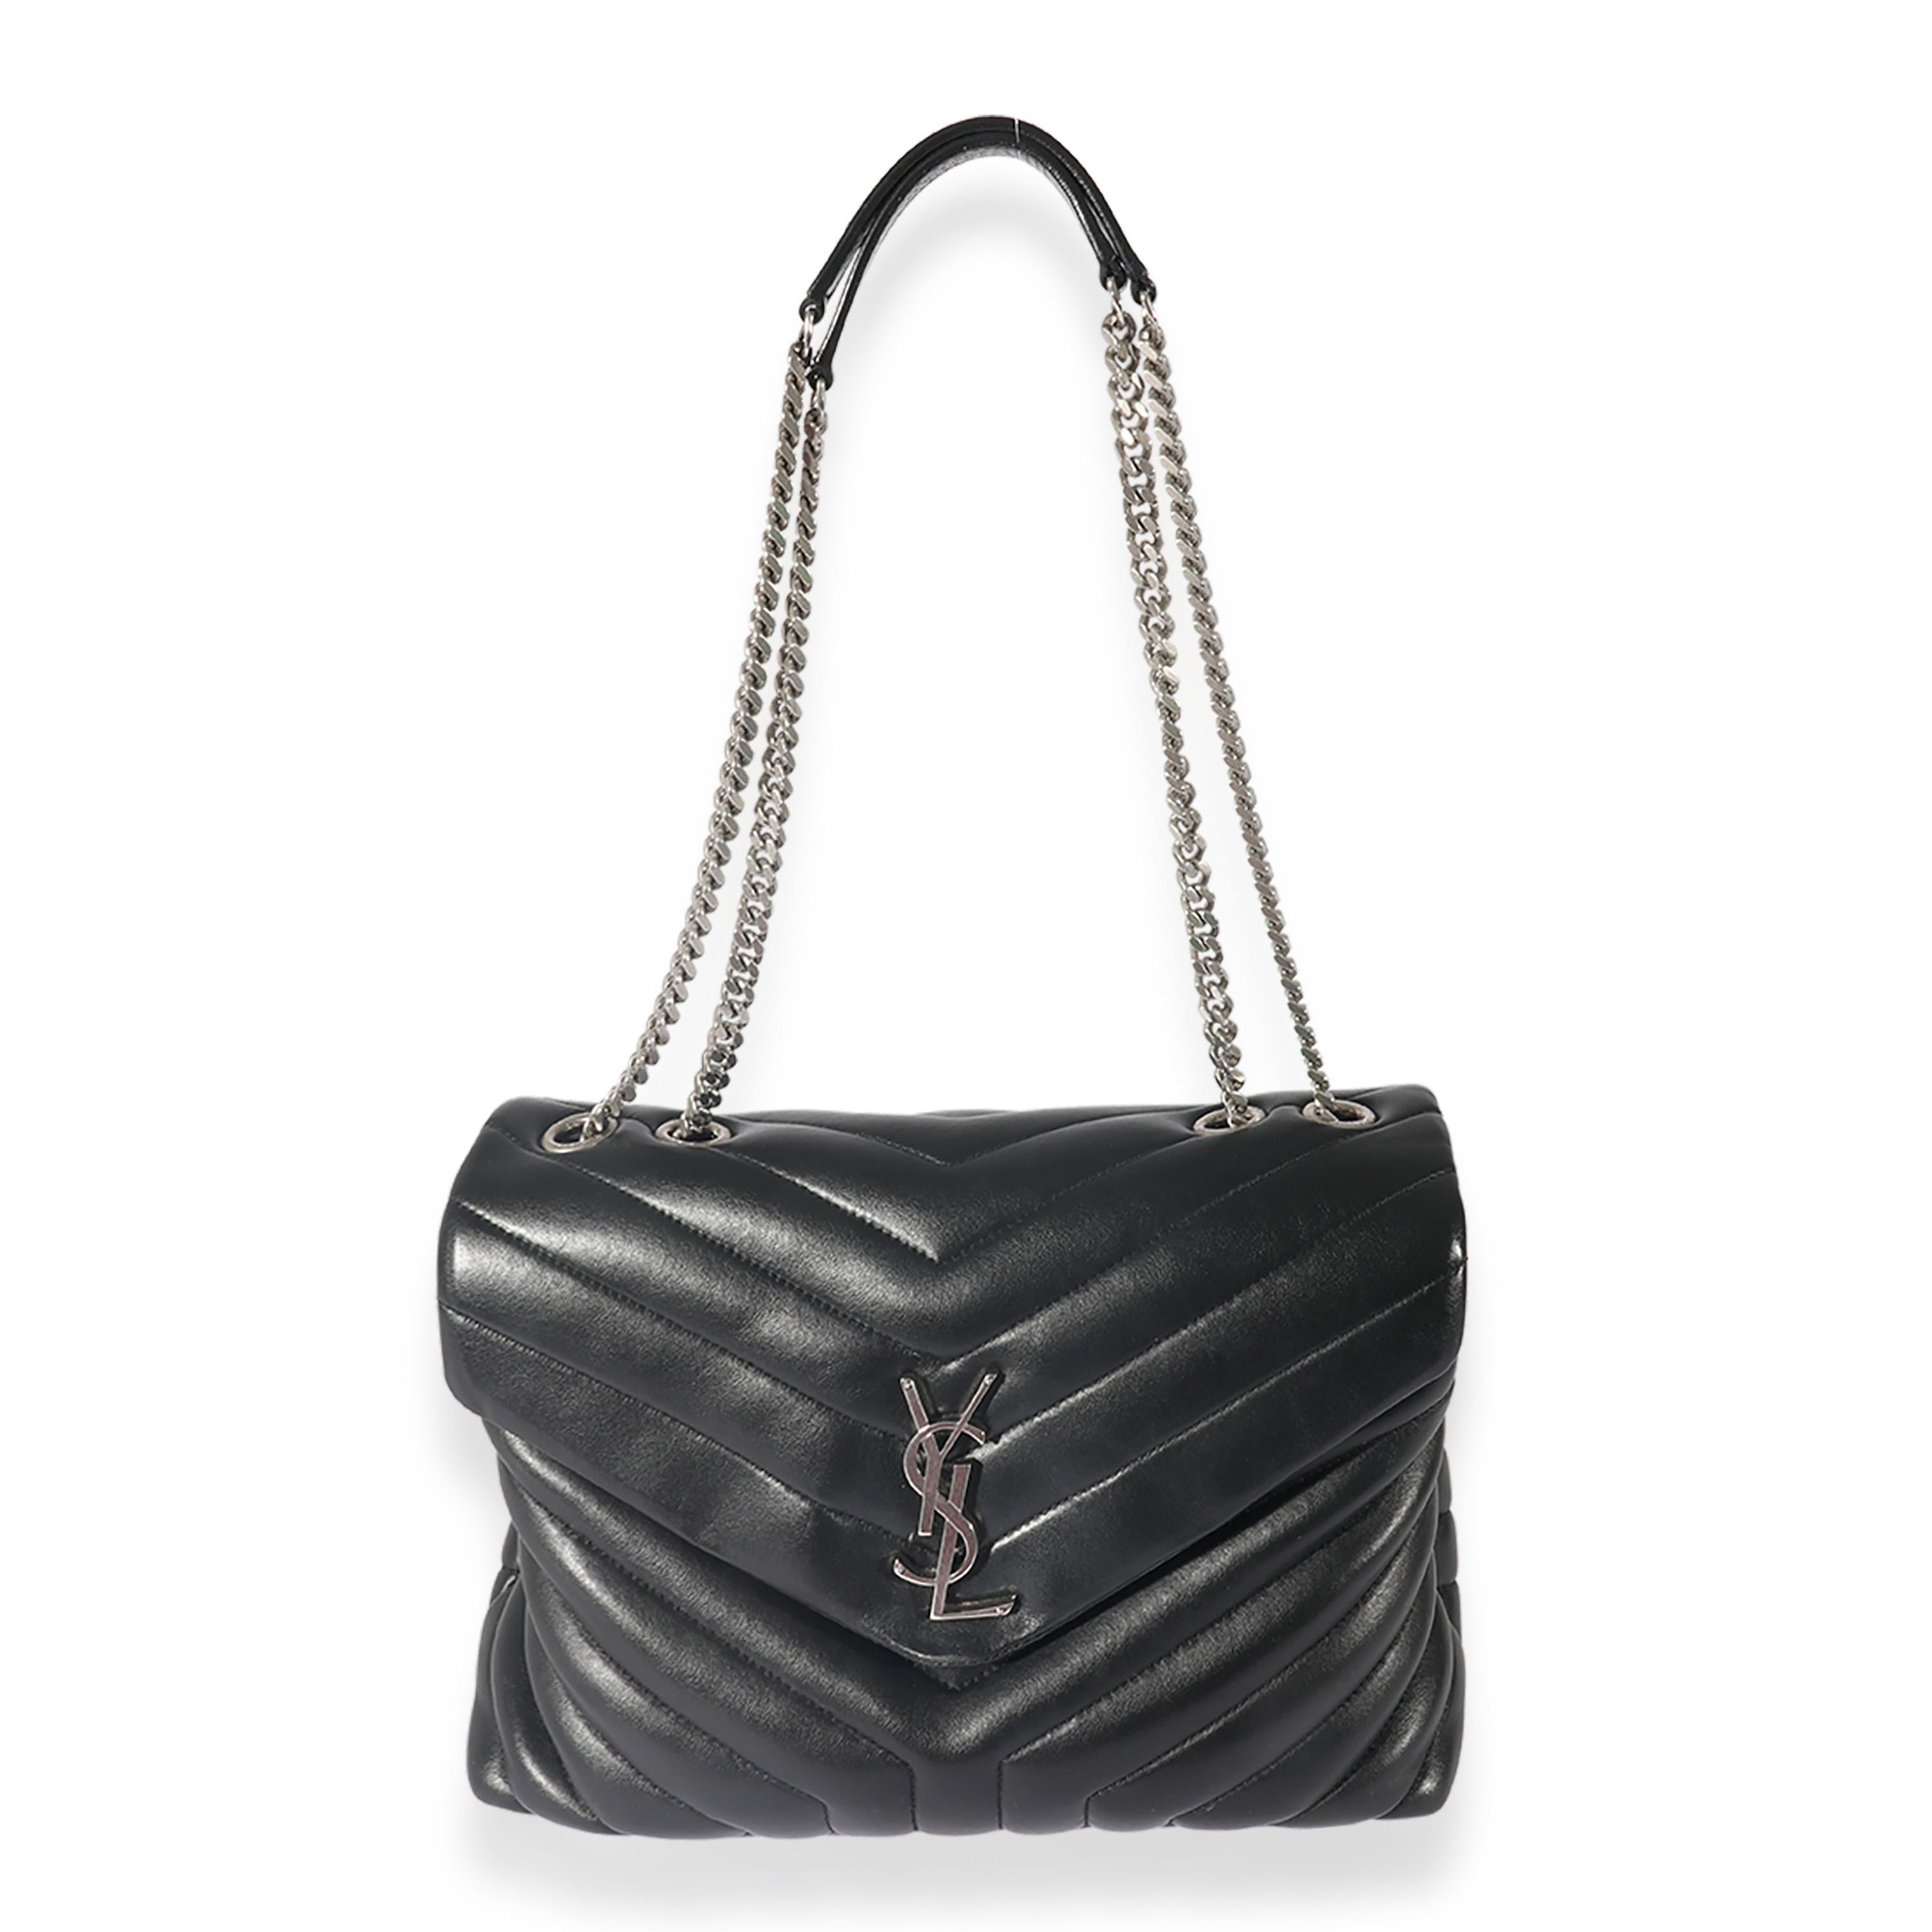 Listing Title: Saint Laurent Black Matelassé Medium LouLou Bag
SKU: 125484
MSRP: 2850.00
Condition: Pre-owned 
Handbag Condition: Very Good
Condition Comments: Very Good Condition. Light scuffing to corners and exterior. Creasing at flap. Scratching